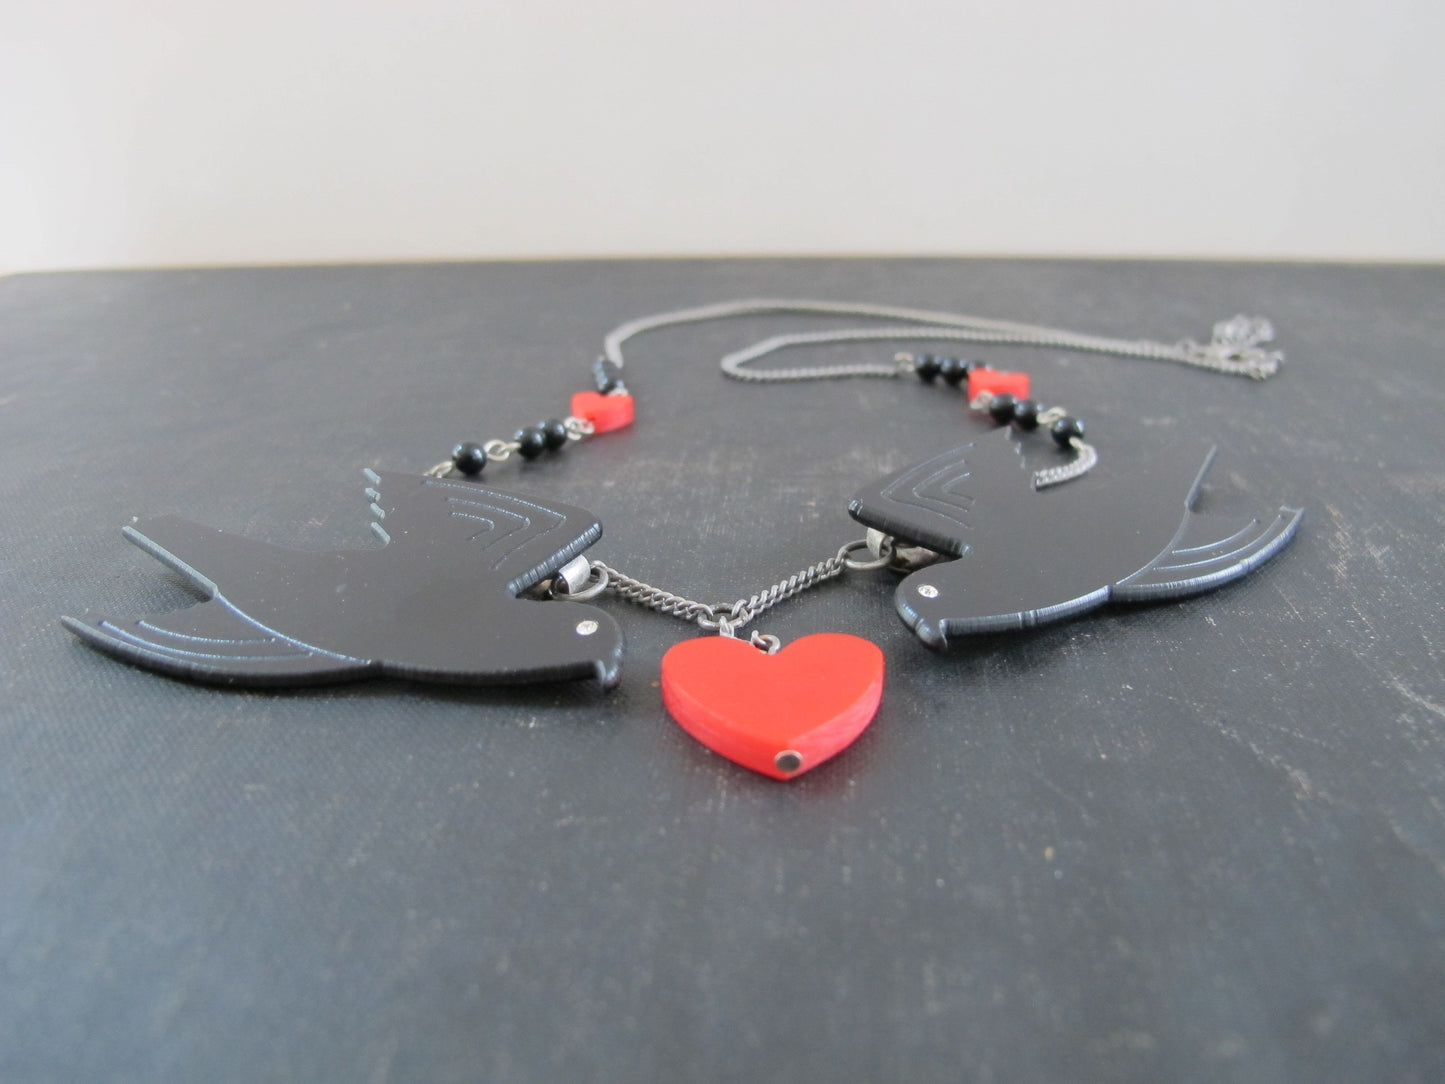 Necklace Blackbirds Hearts Black Red 1990s Charms